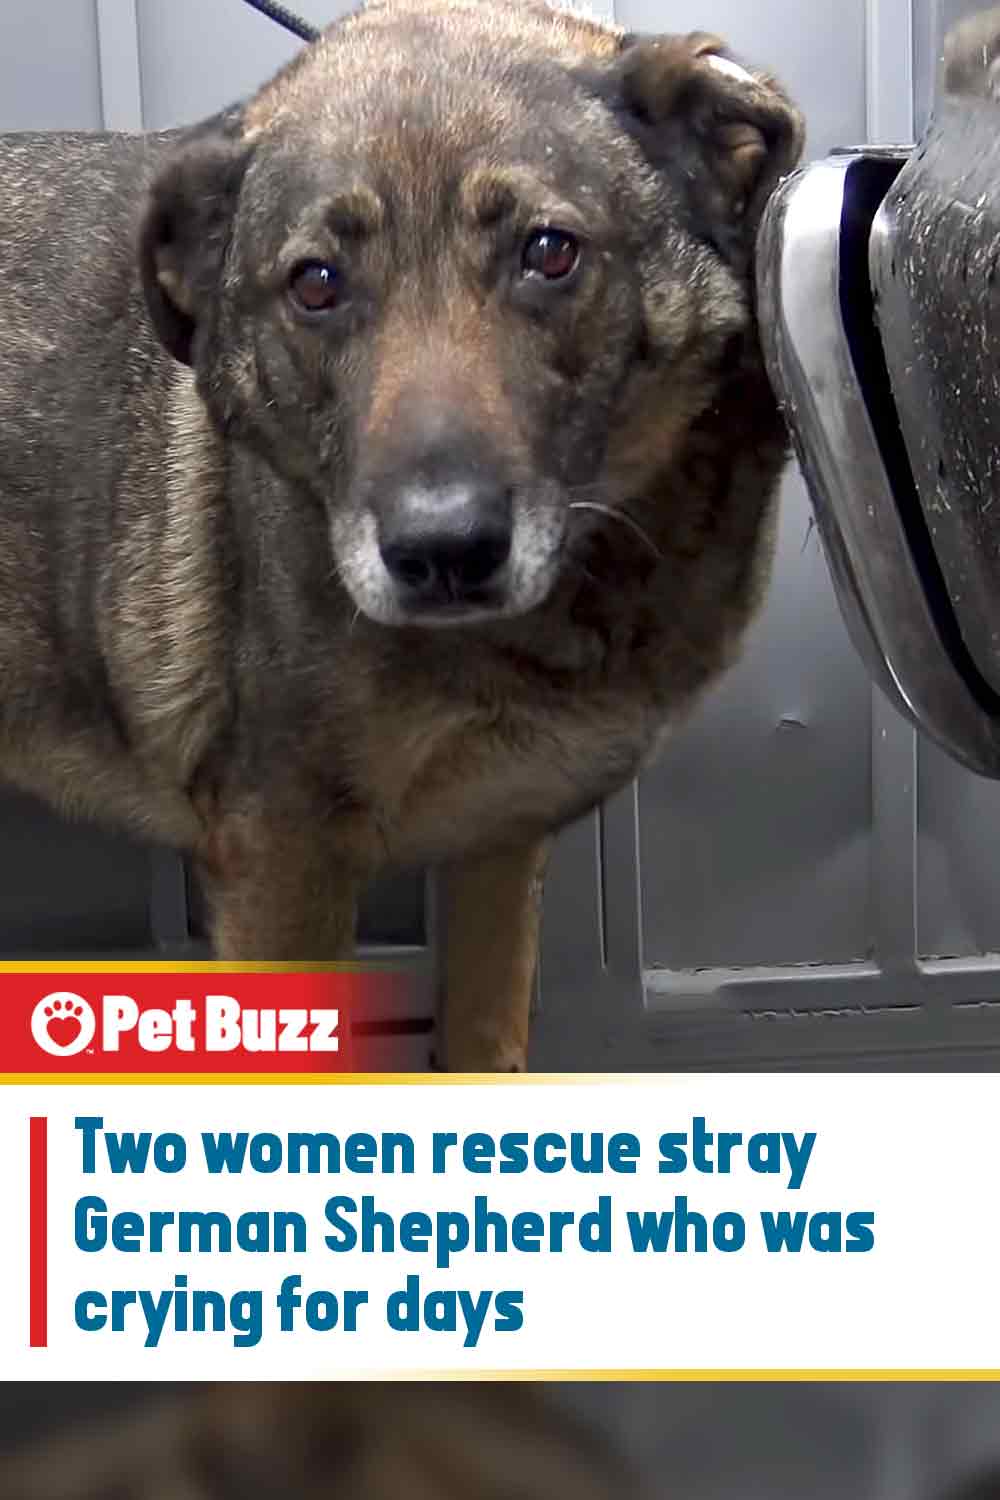 Two women rescue stray German Shepherd who was crying for days